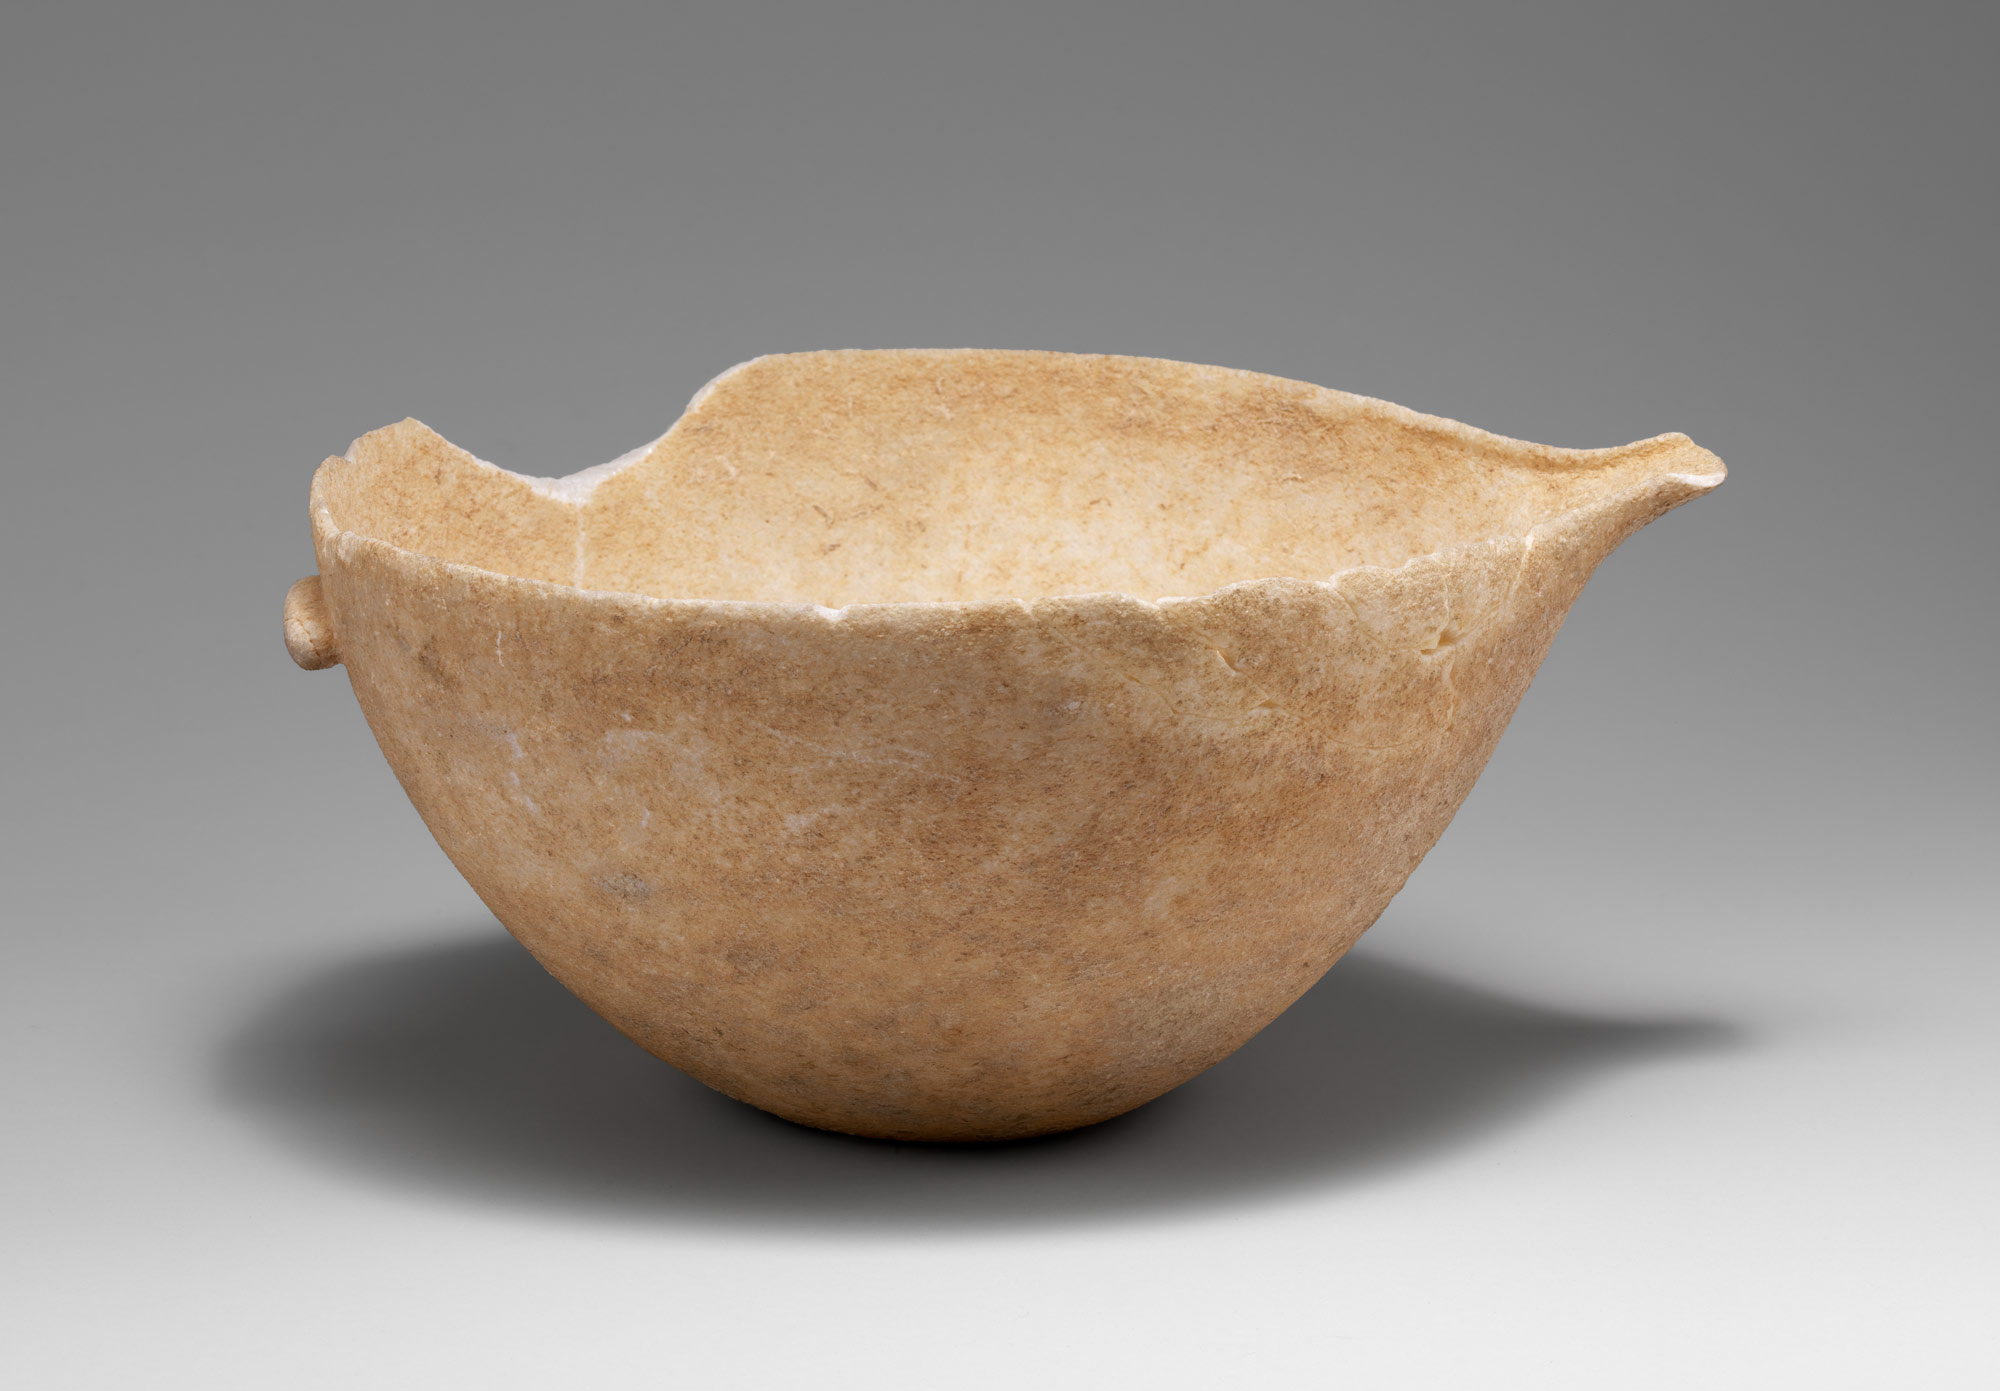 Marble spouted bowl